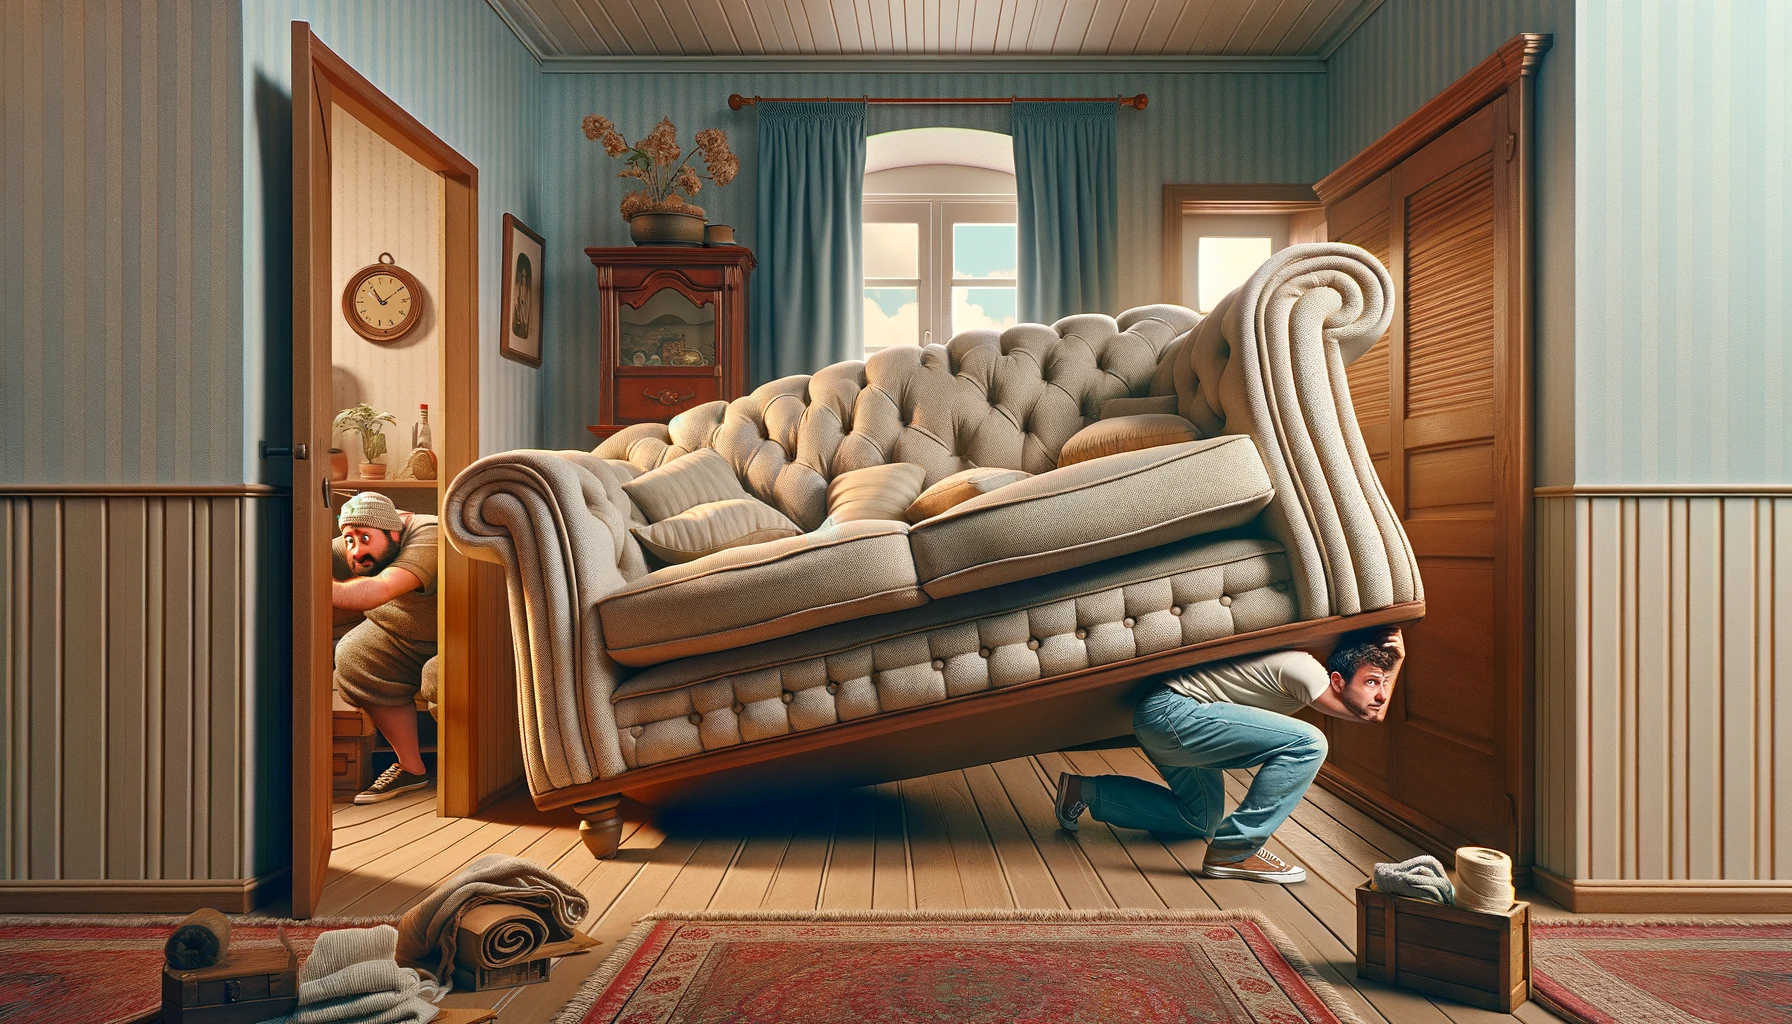 A comical depiction of a person awkwardly attempting to maneuver an oversized couch through a narrow doorway, highlighting the challenges of DIY furniture moving